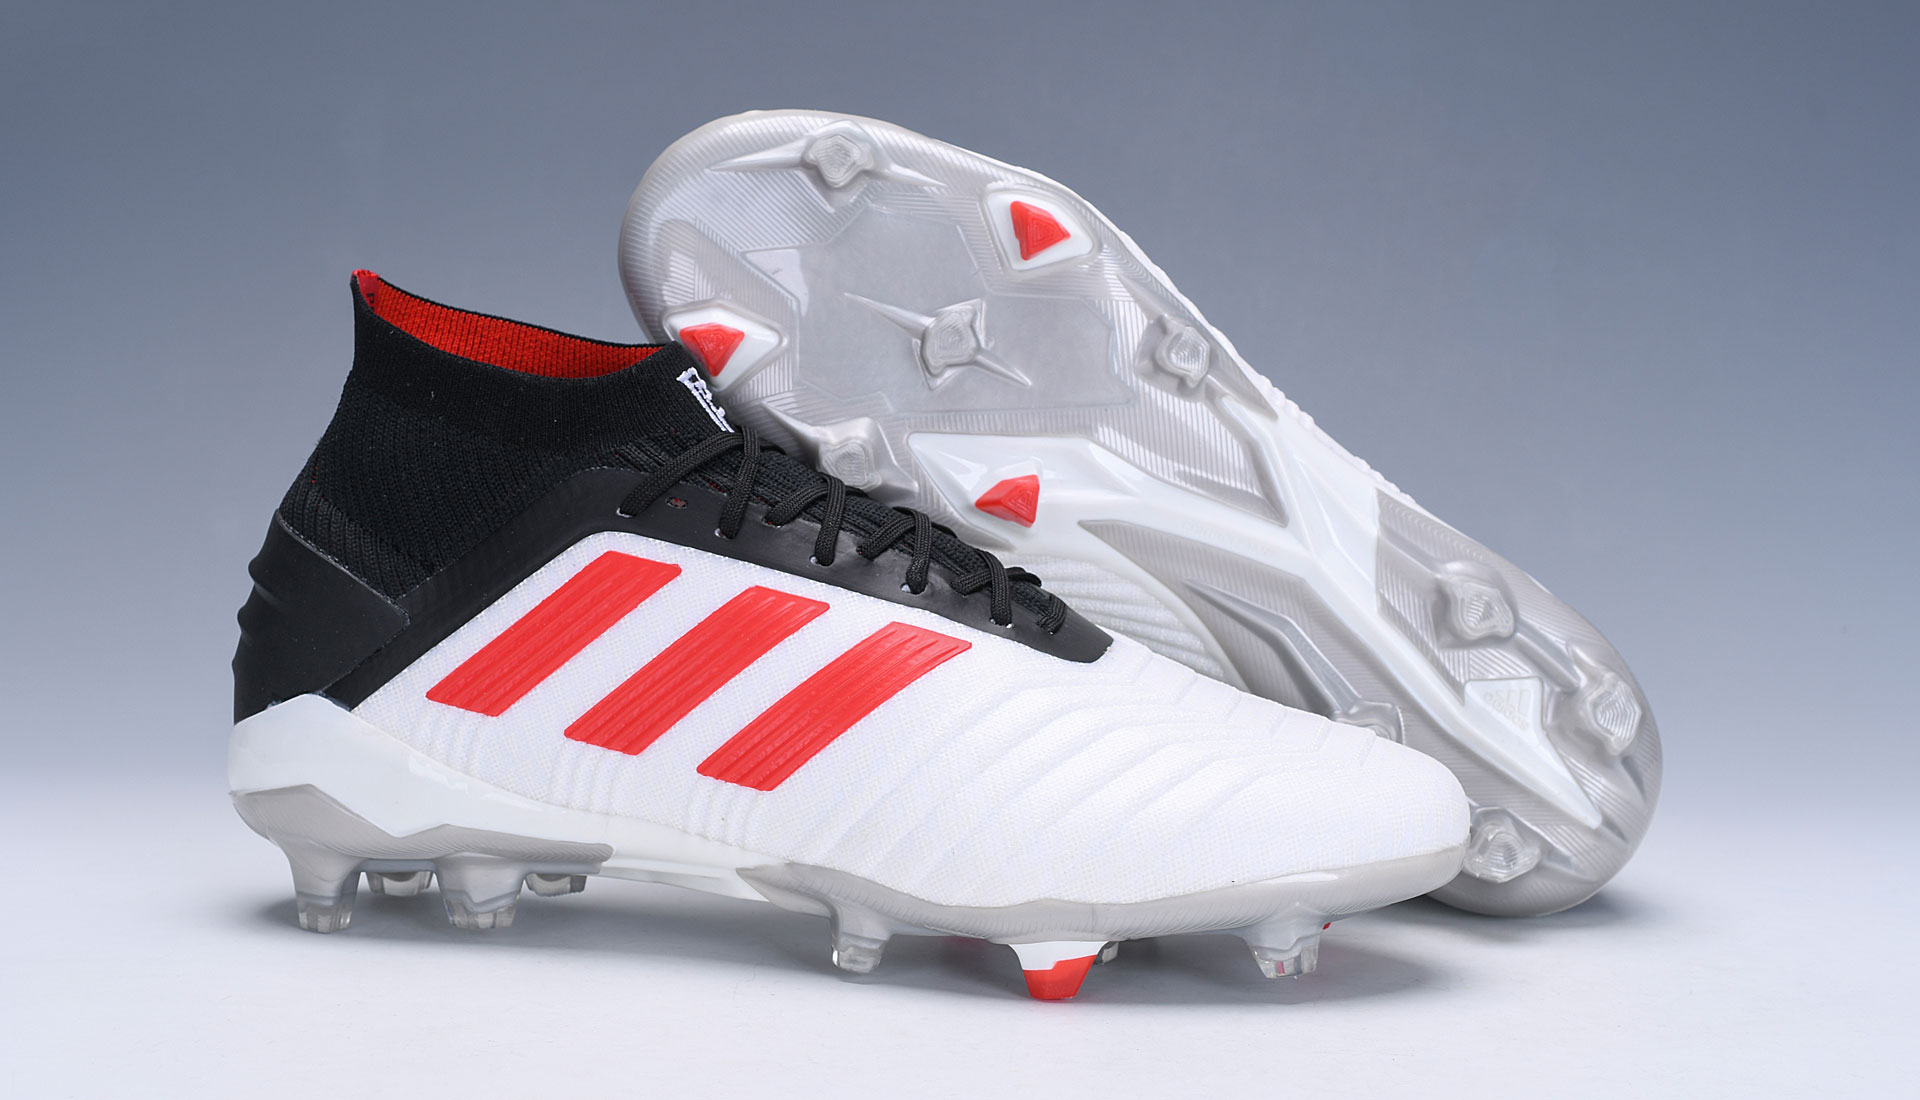 Adidas PREDATOR 19+ PAUL POGBA FG White F37094 - Buy Online at Competitive Prices